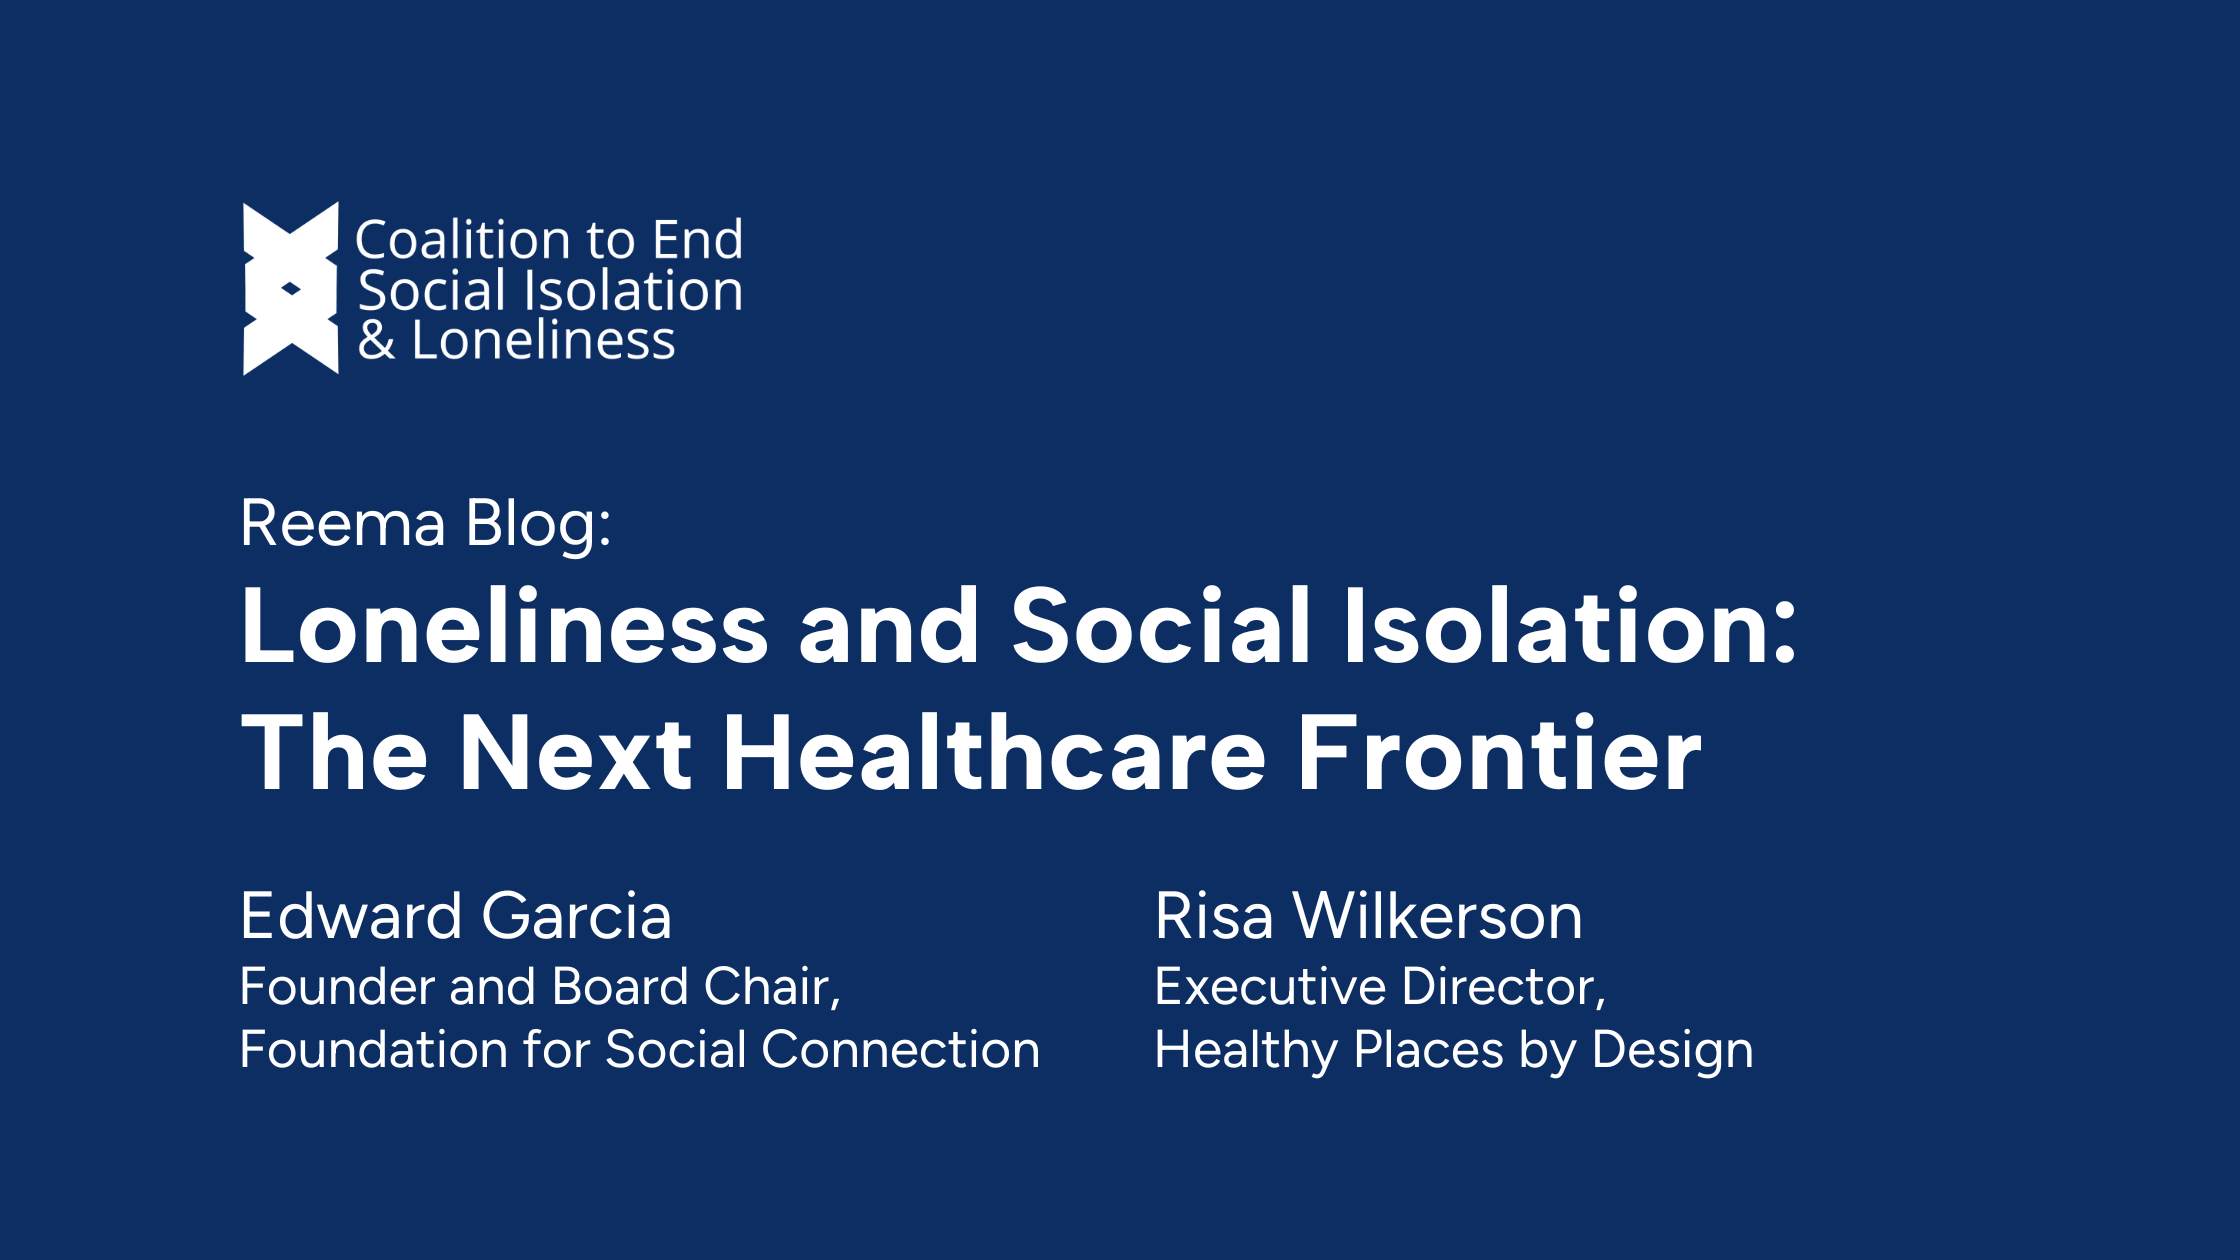 REEMA Blog: Loneliness and Social Isolation: The Next Healthcare Frontier